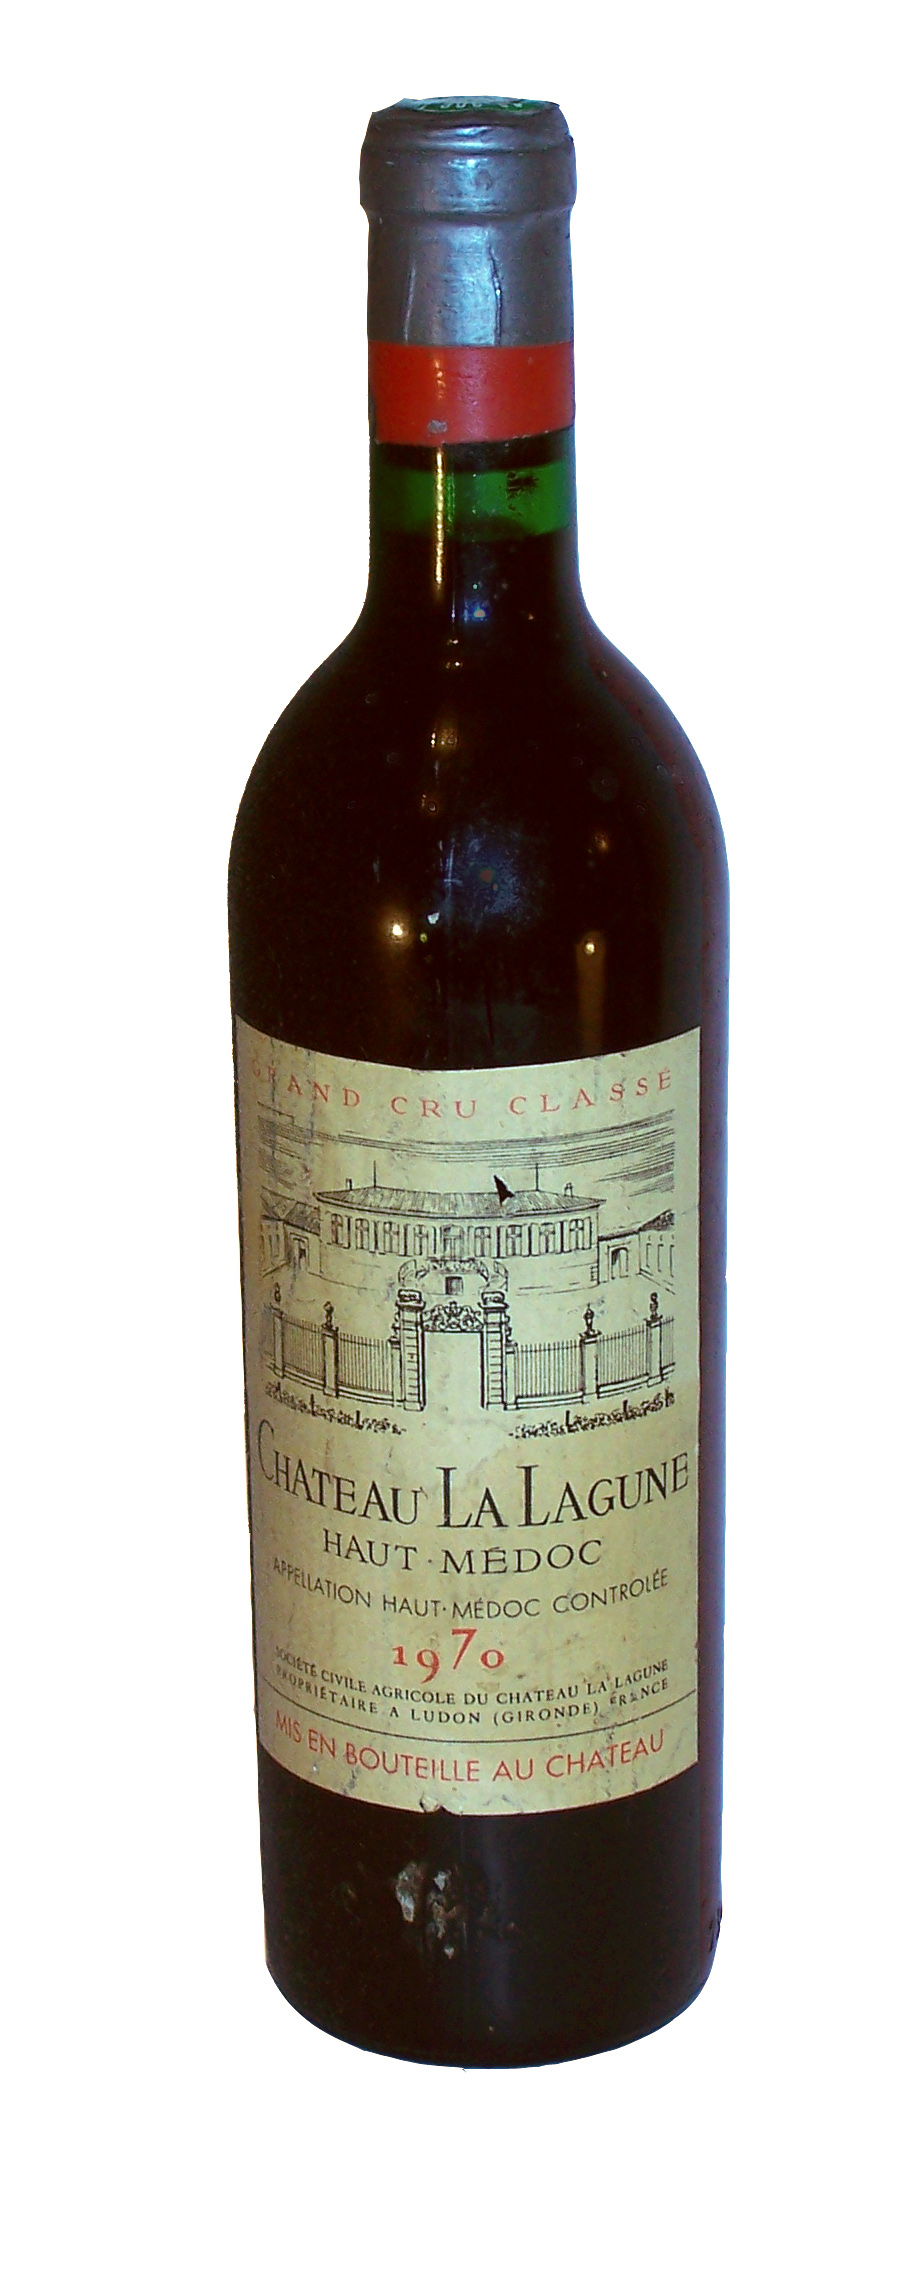 a bottle of wine with some writing on the label